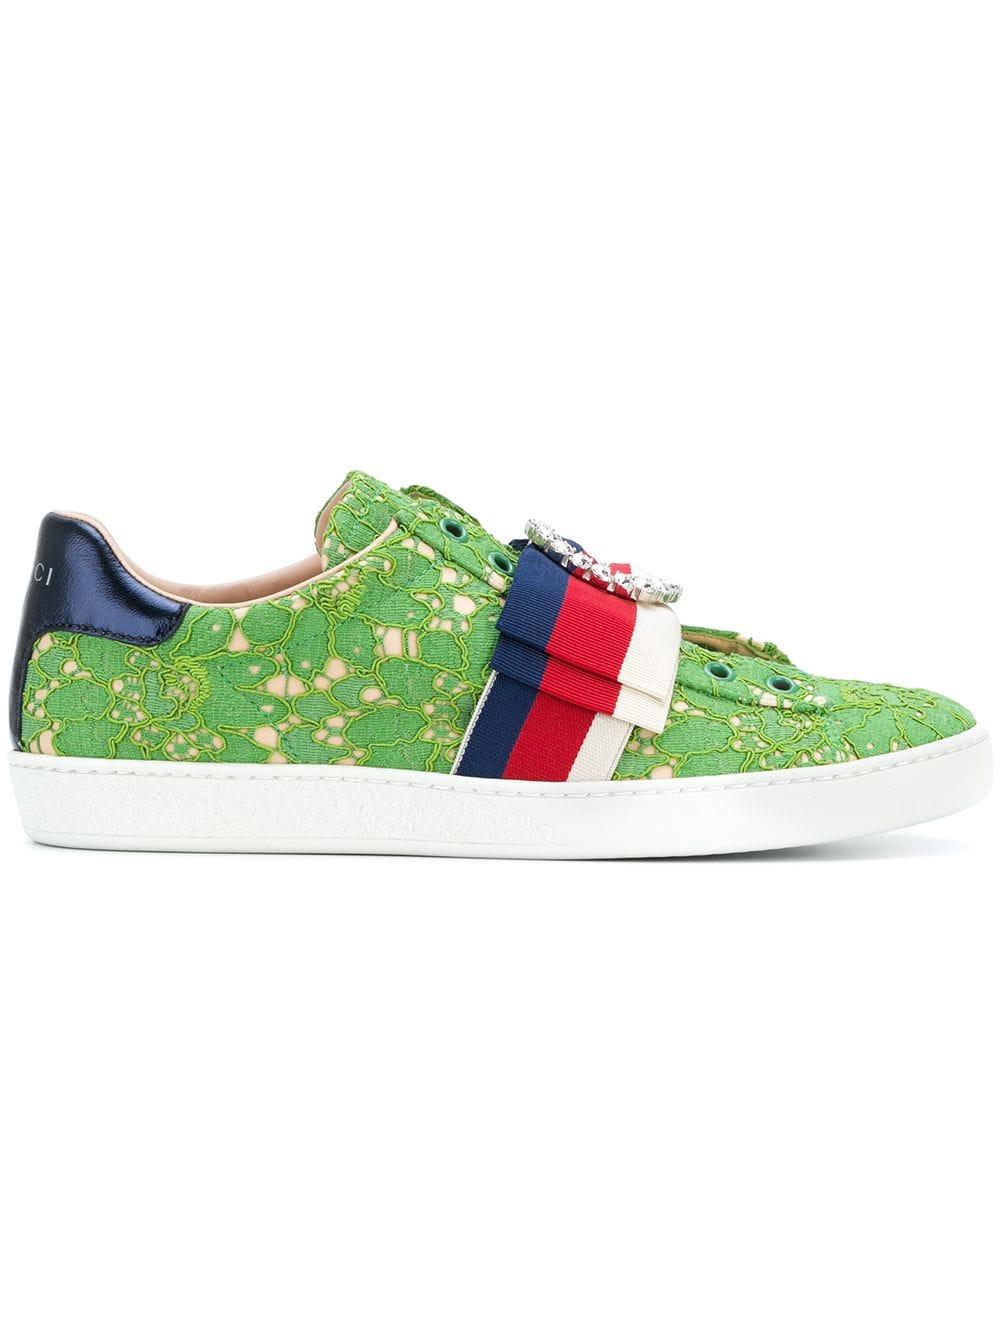 Gucci Ace Lace Sneakers in Green | Lyst Canada